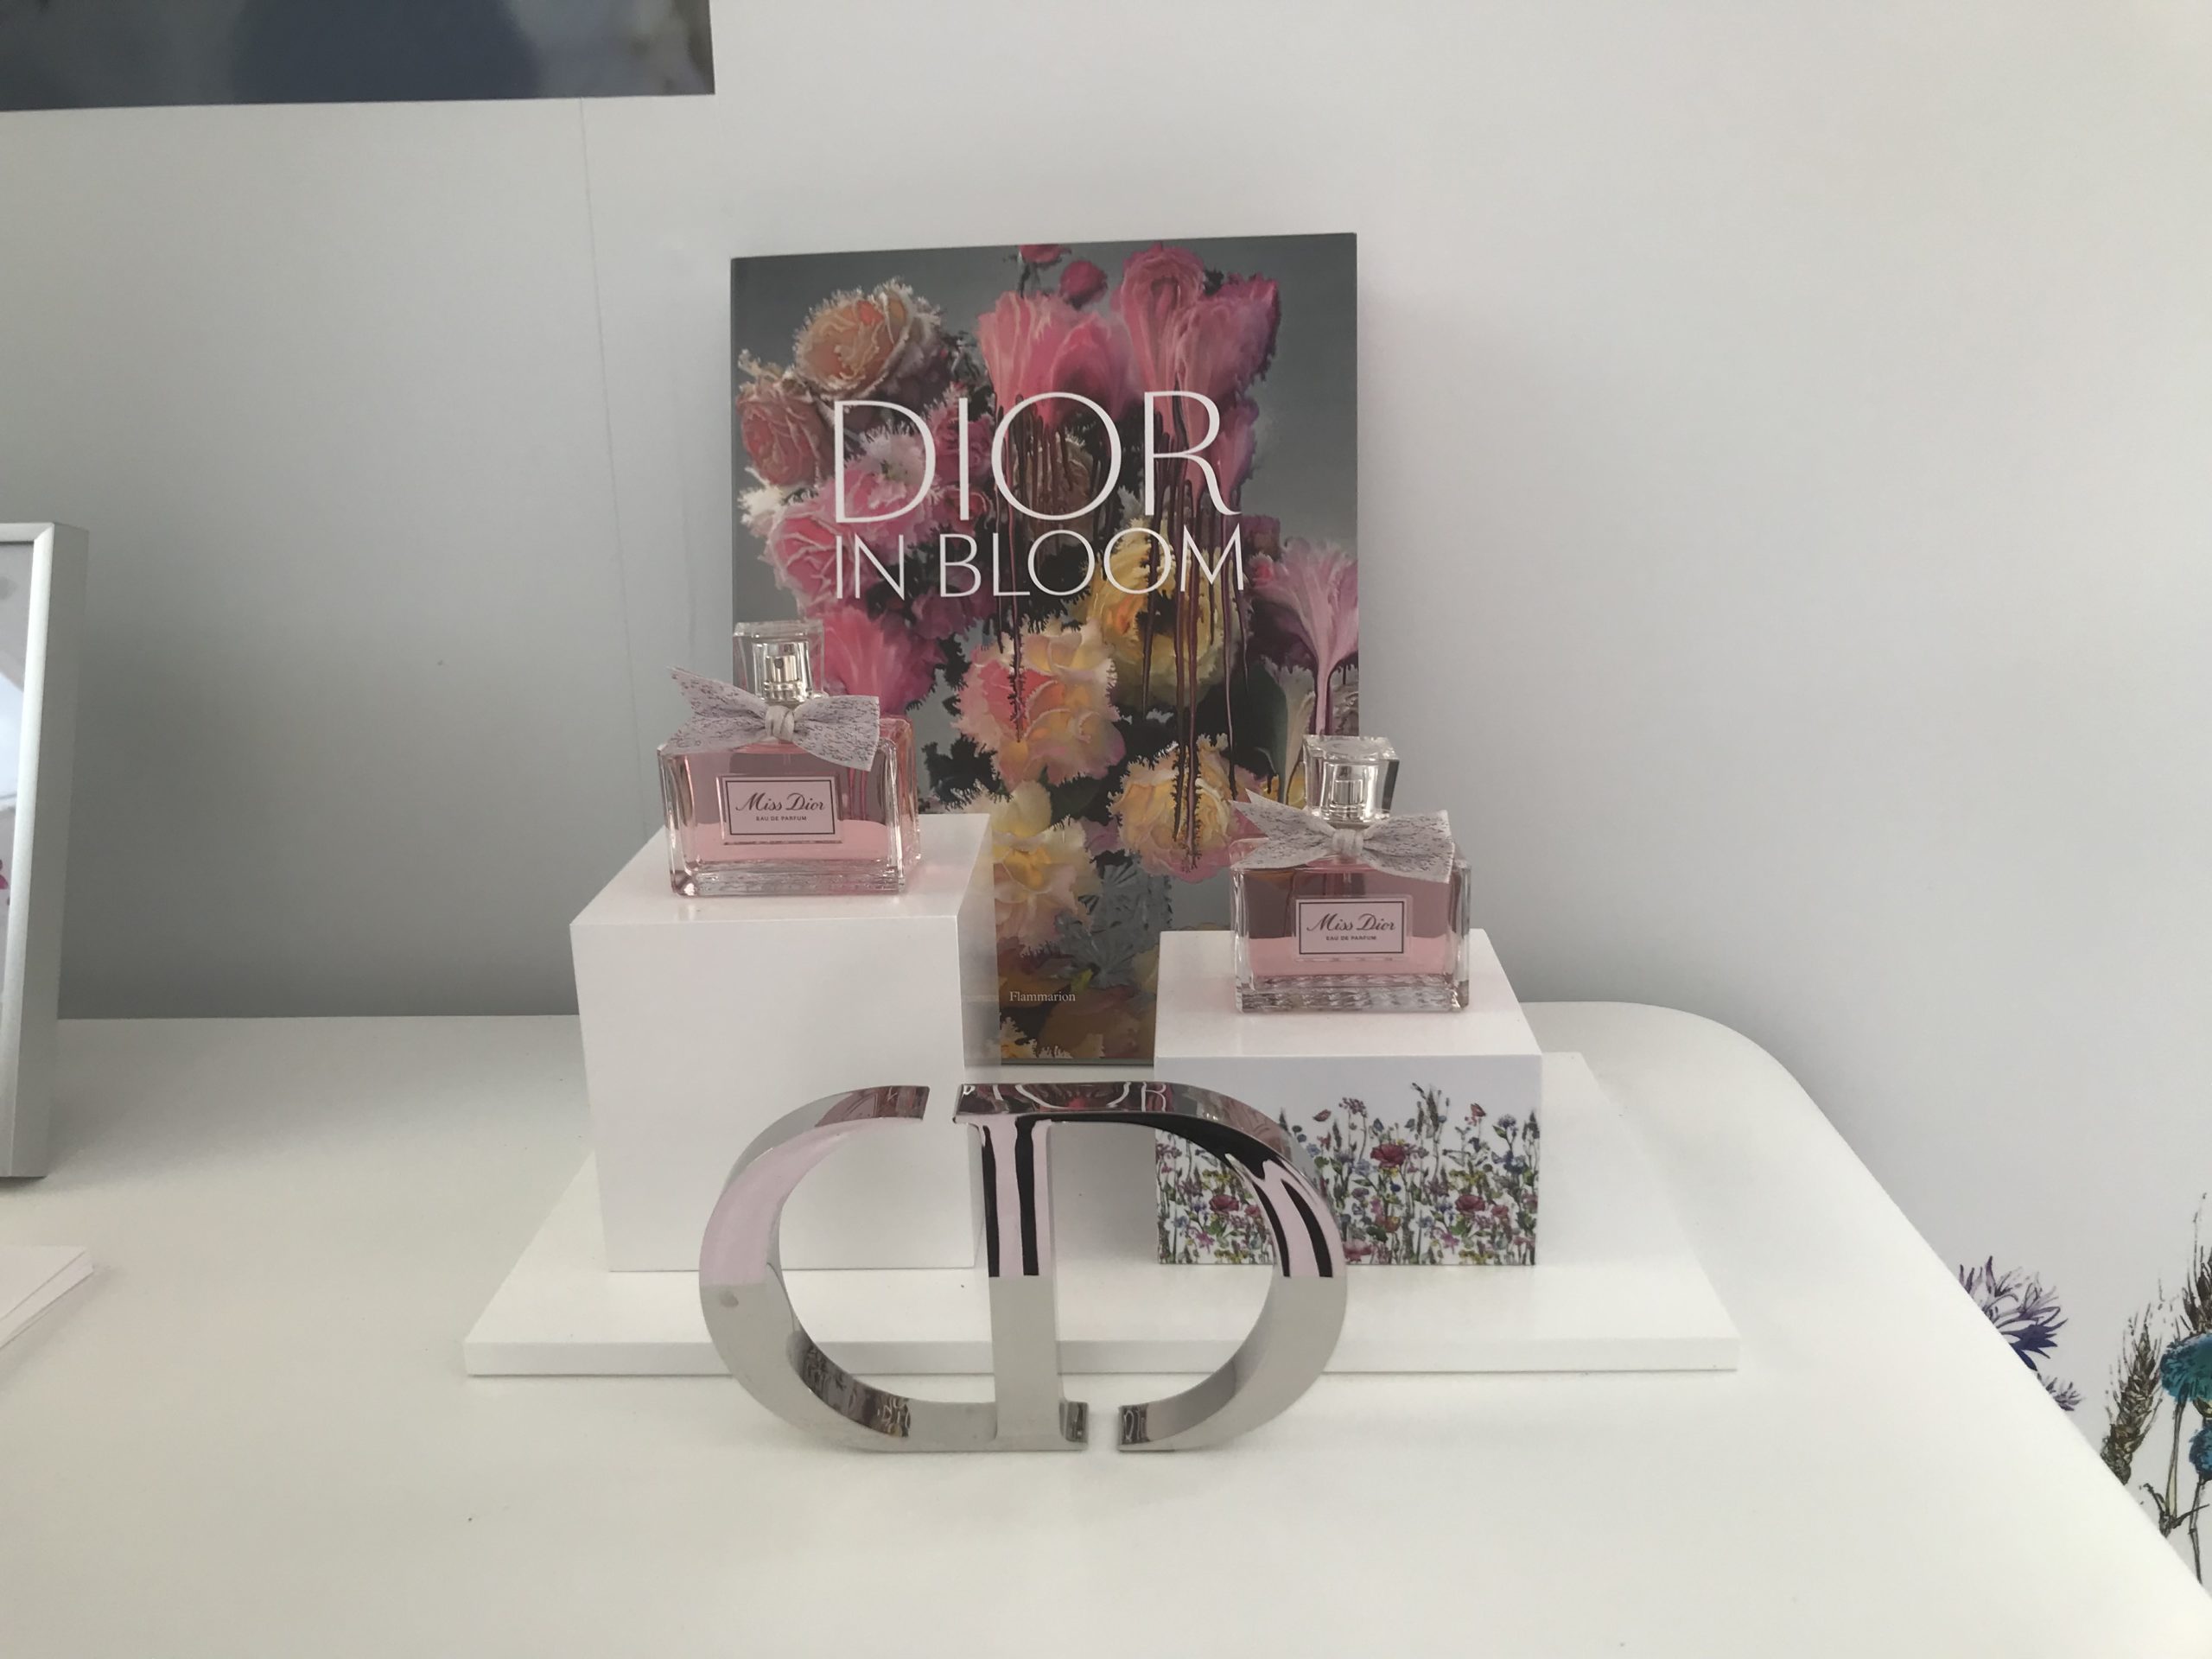 Dior Relaunches Its Iconic Perfume Miss Dior With a Floral Pop-Up Shop in  NYC